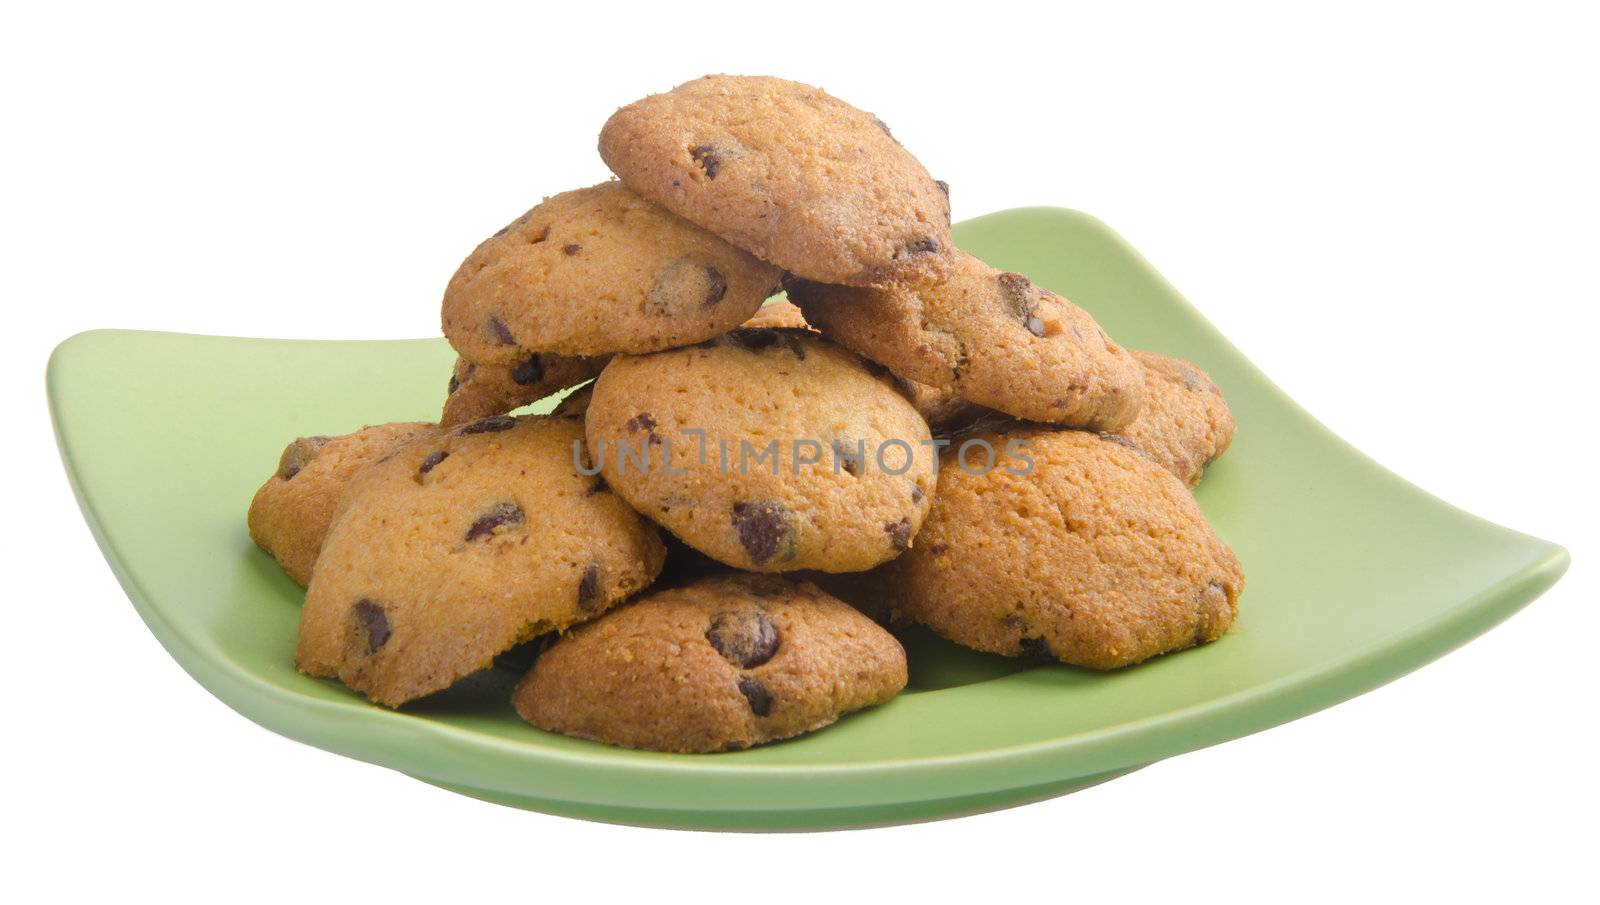 Chocolate Chip Cookies Isolated On White Background by heinteh